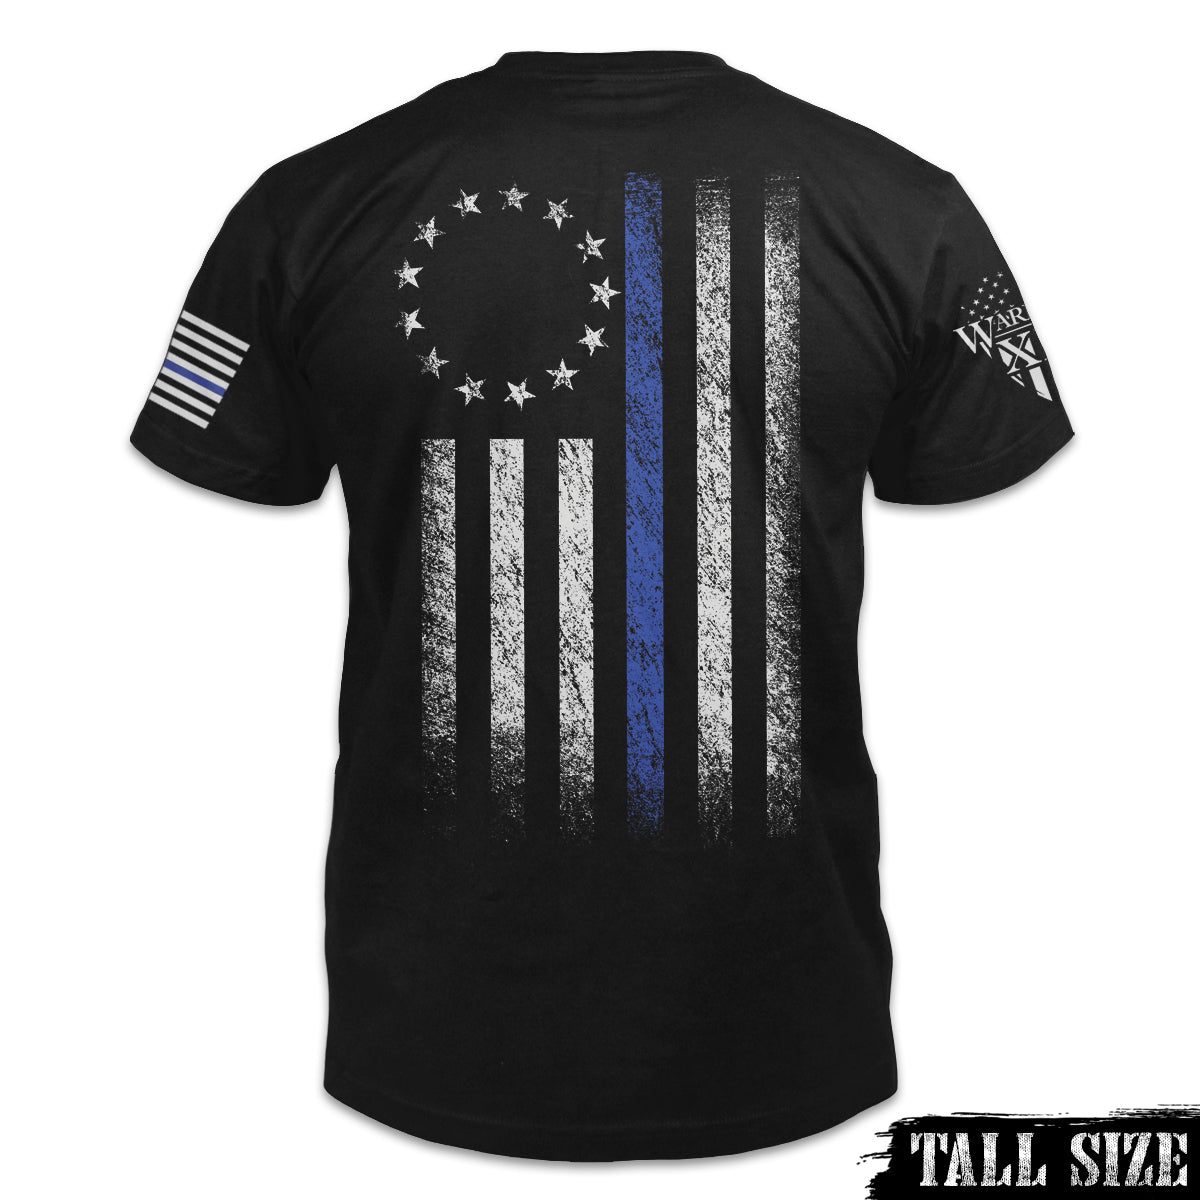 A black tall size shirt that features a thin blue line Betsy Ross flag on a back print to show that we remain undeterred in our support for American law enforcement. printed on the back of the shirt.